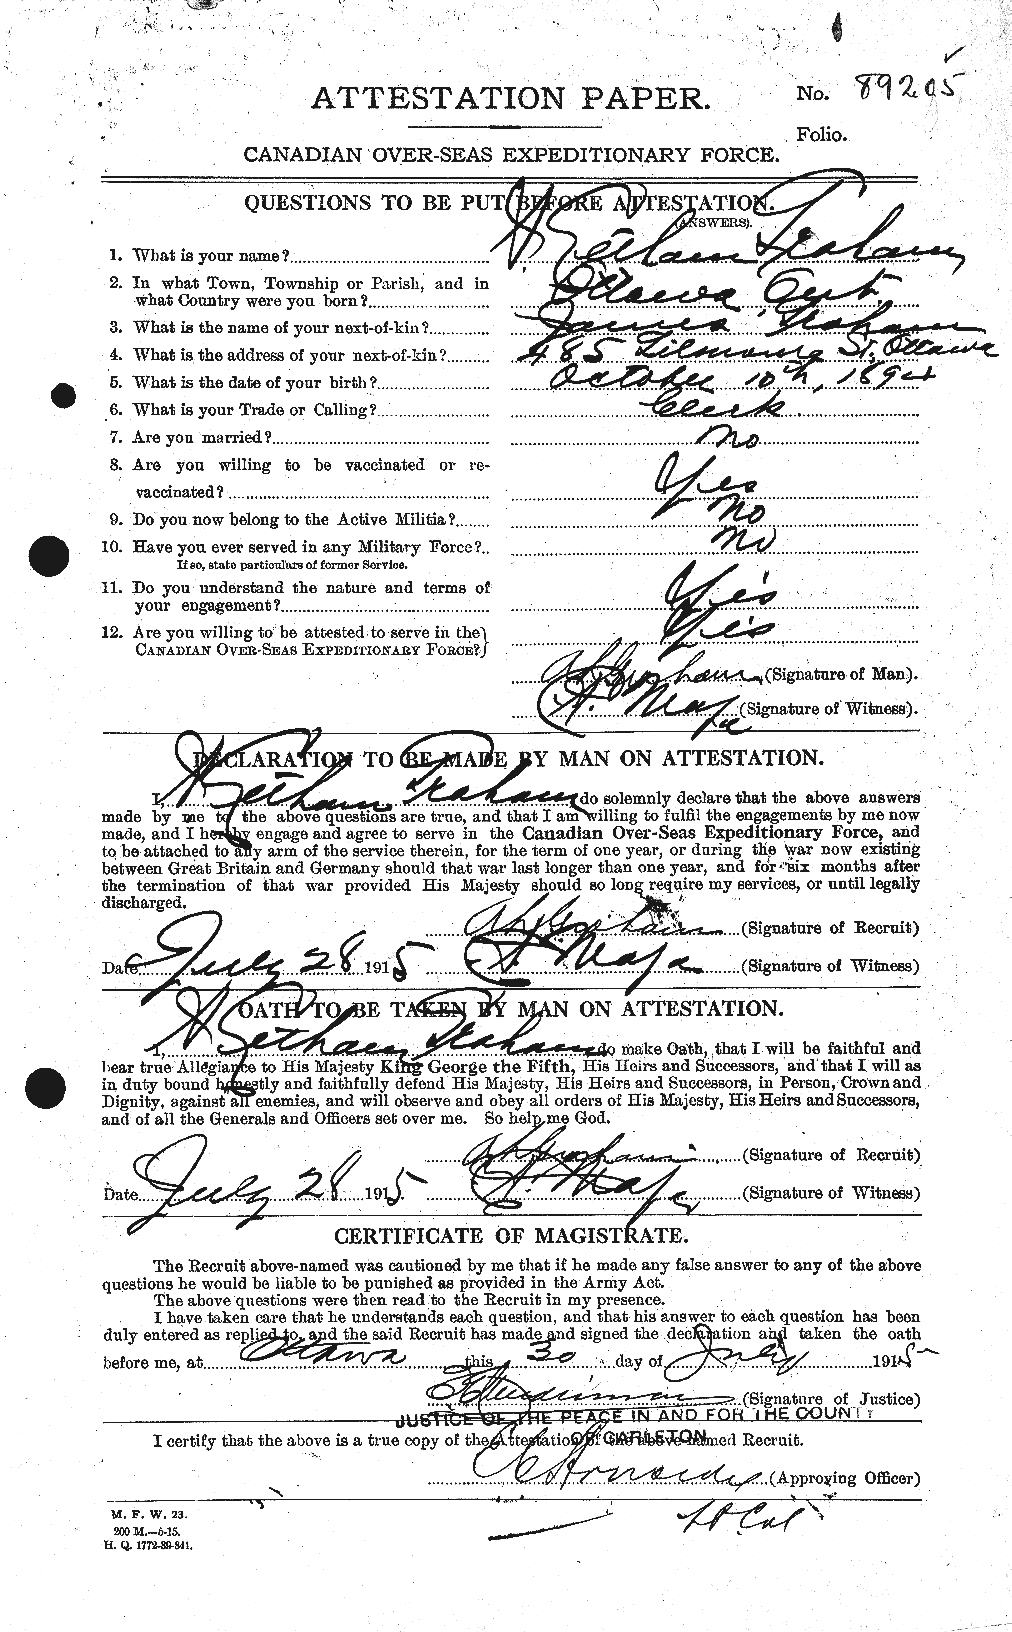 Personnel Records of the First World War - CEF 359558a